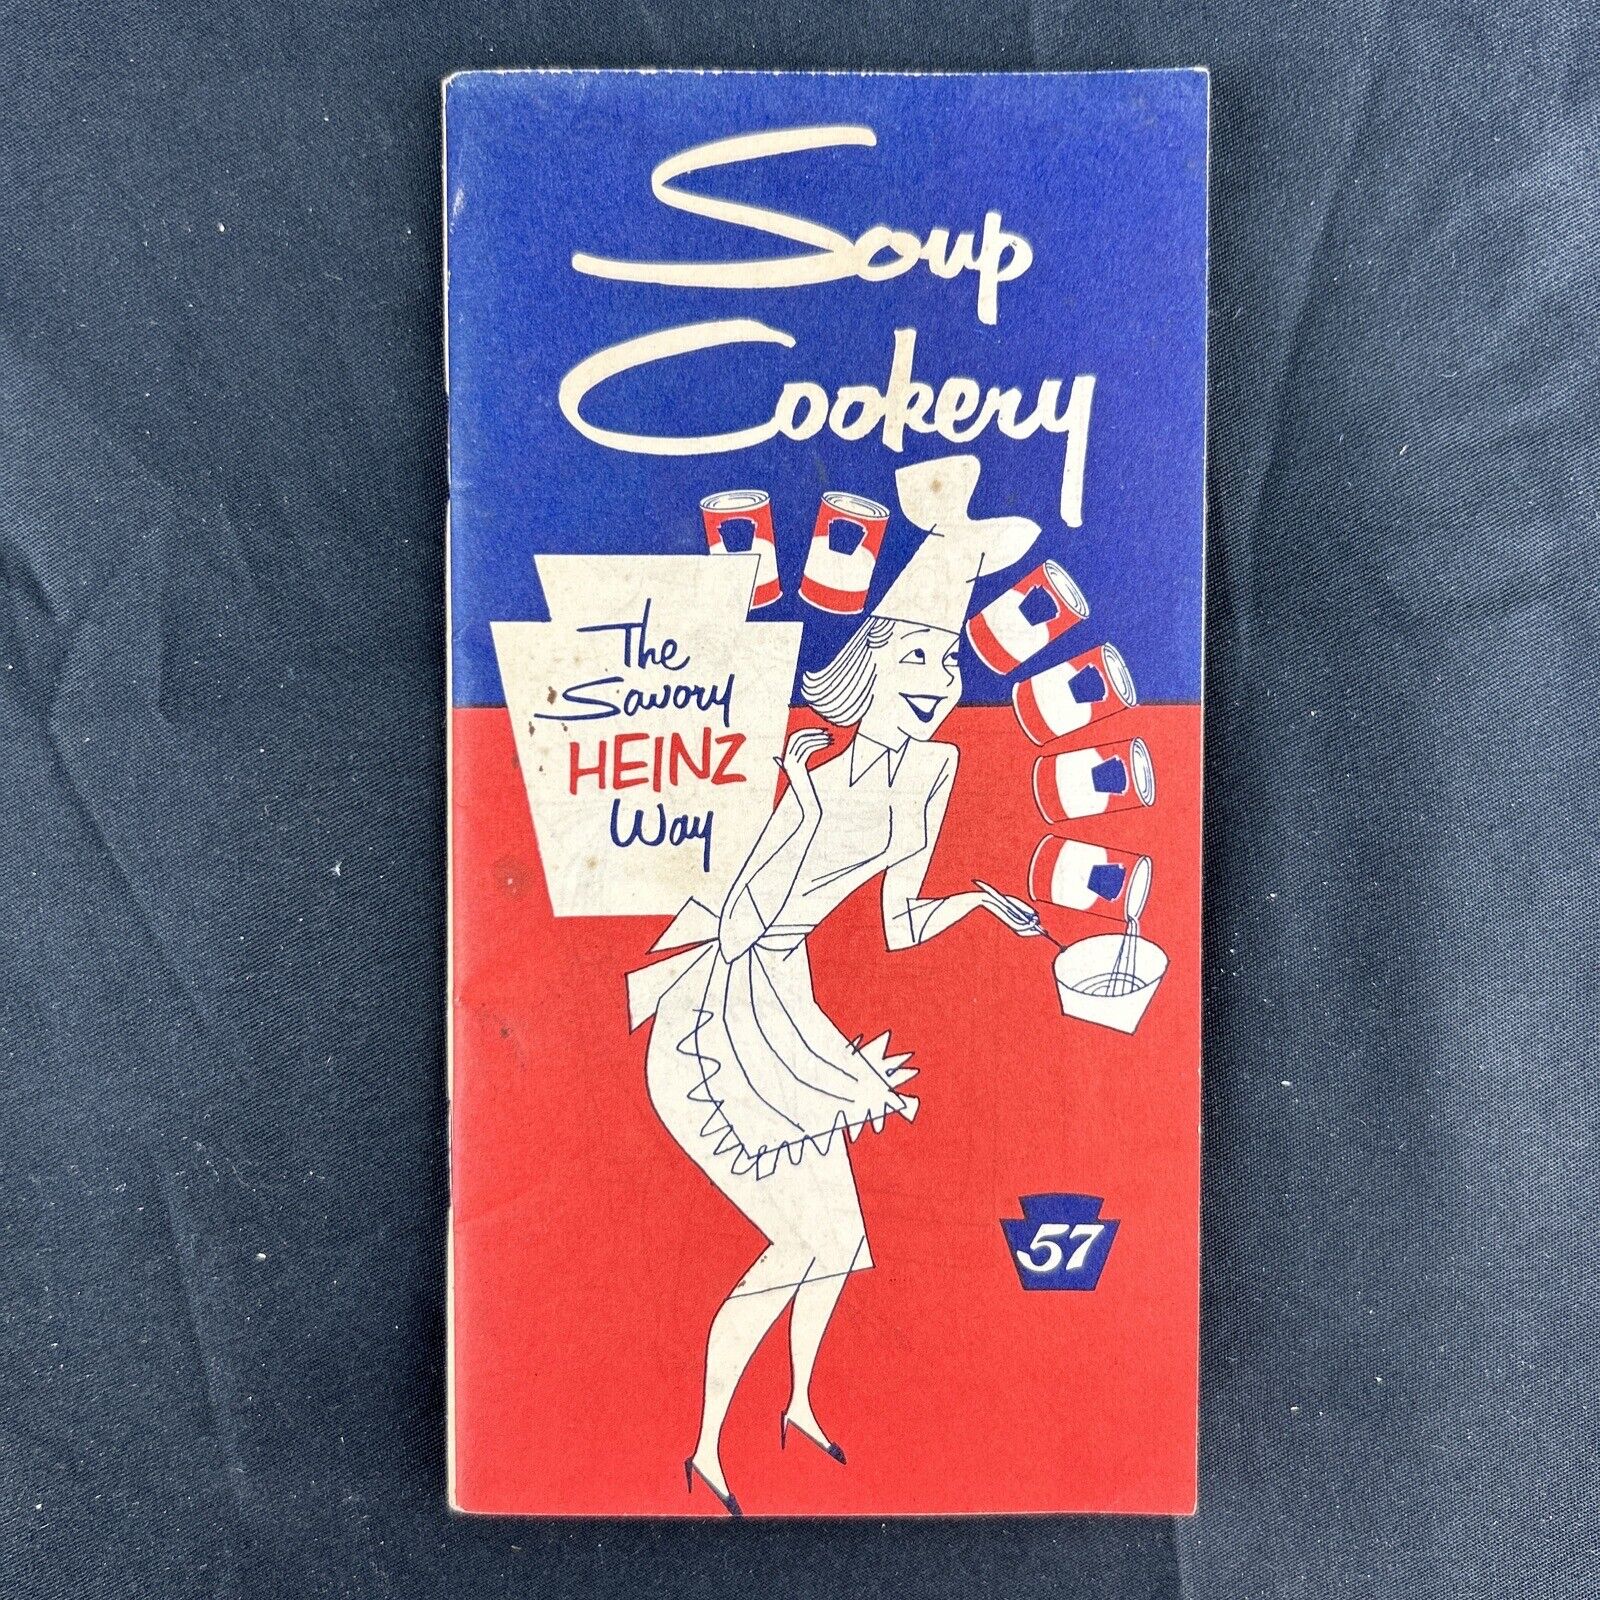 Vintage Soup Cookery The Savory Heinz 57 Way Booklet Recipes